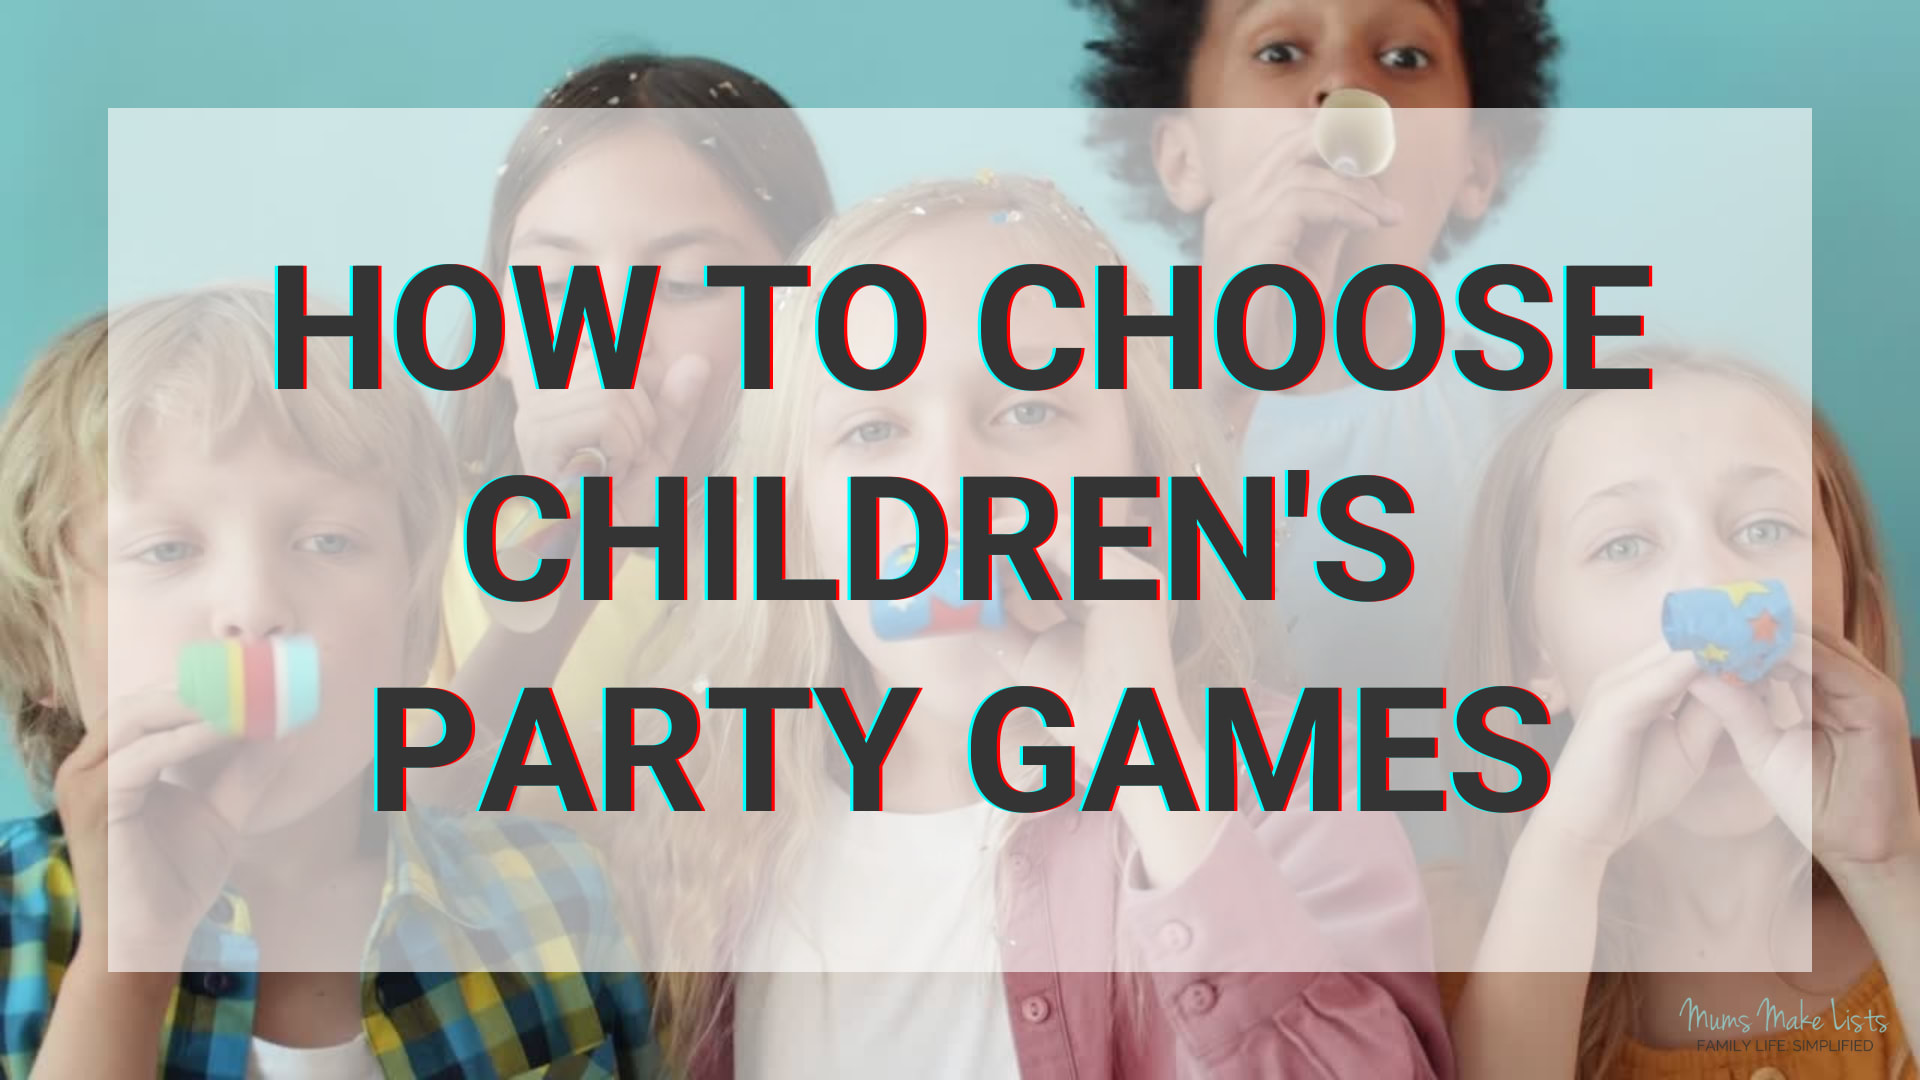 5 party games to play online with friends while you're staying inside